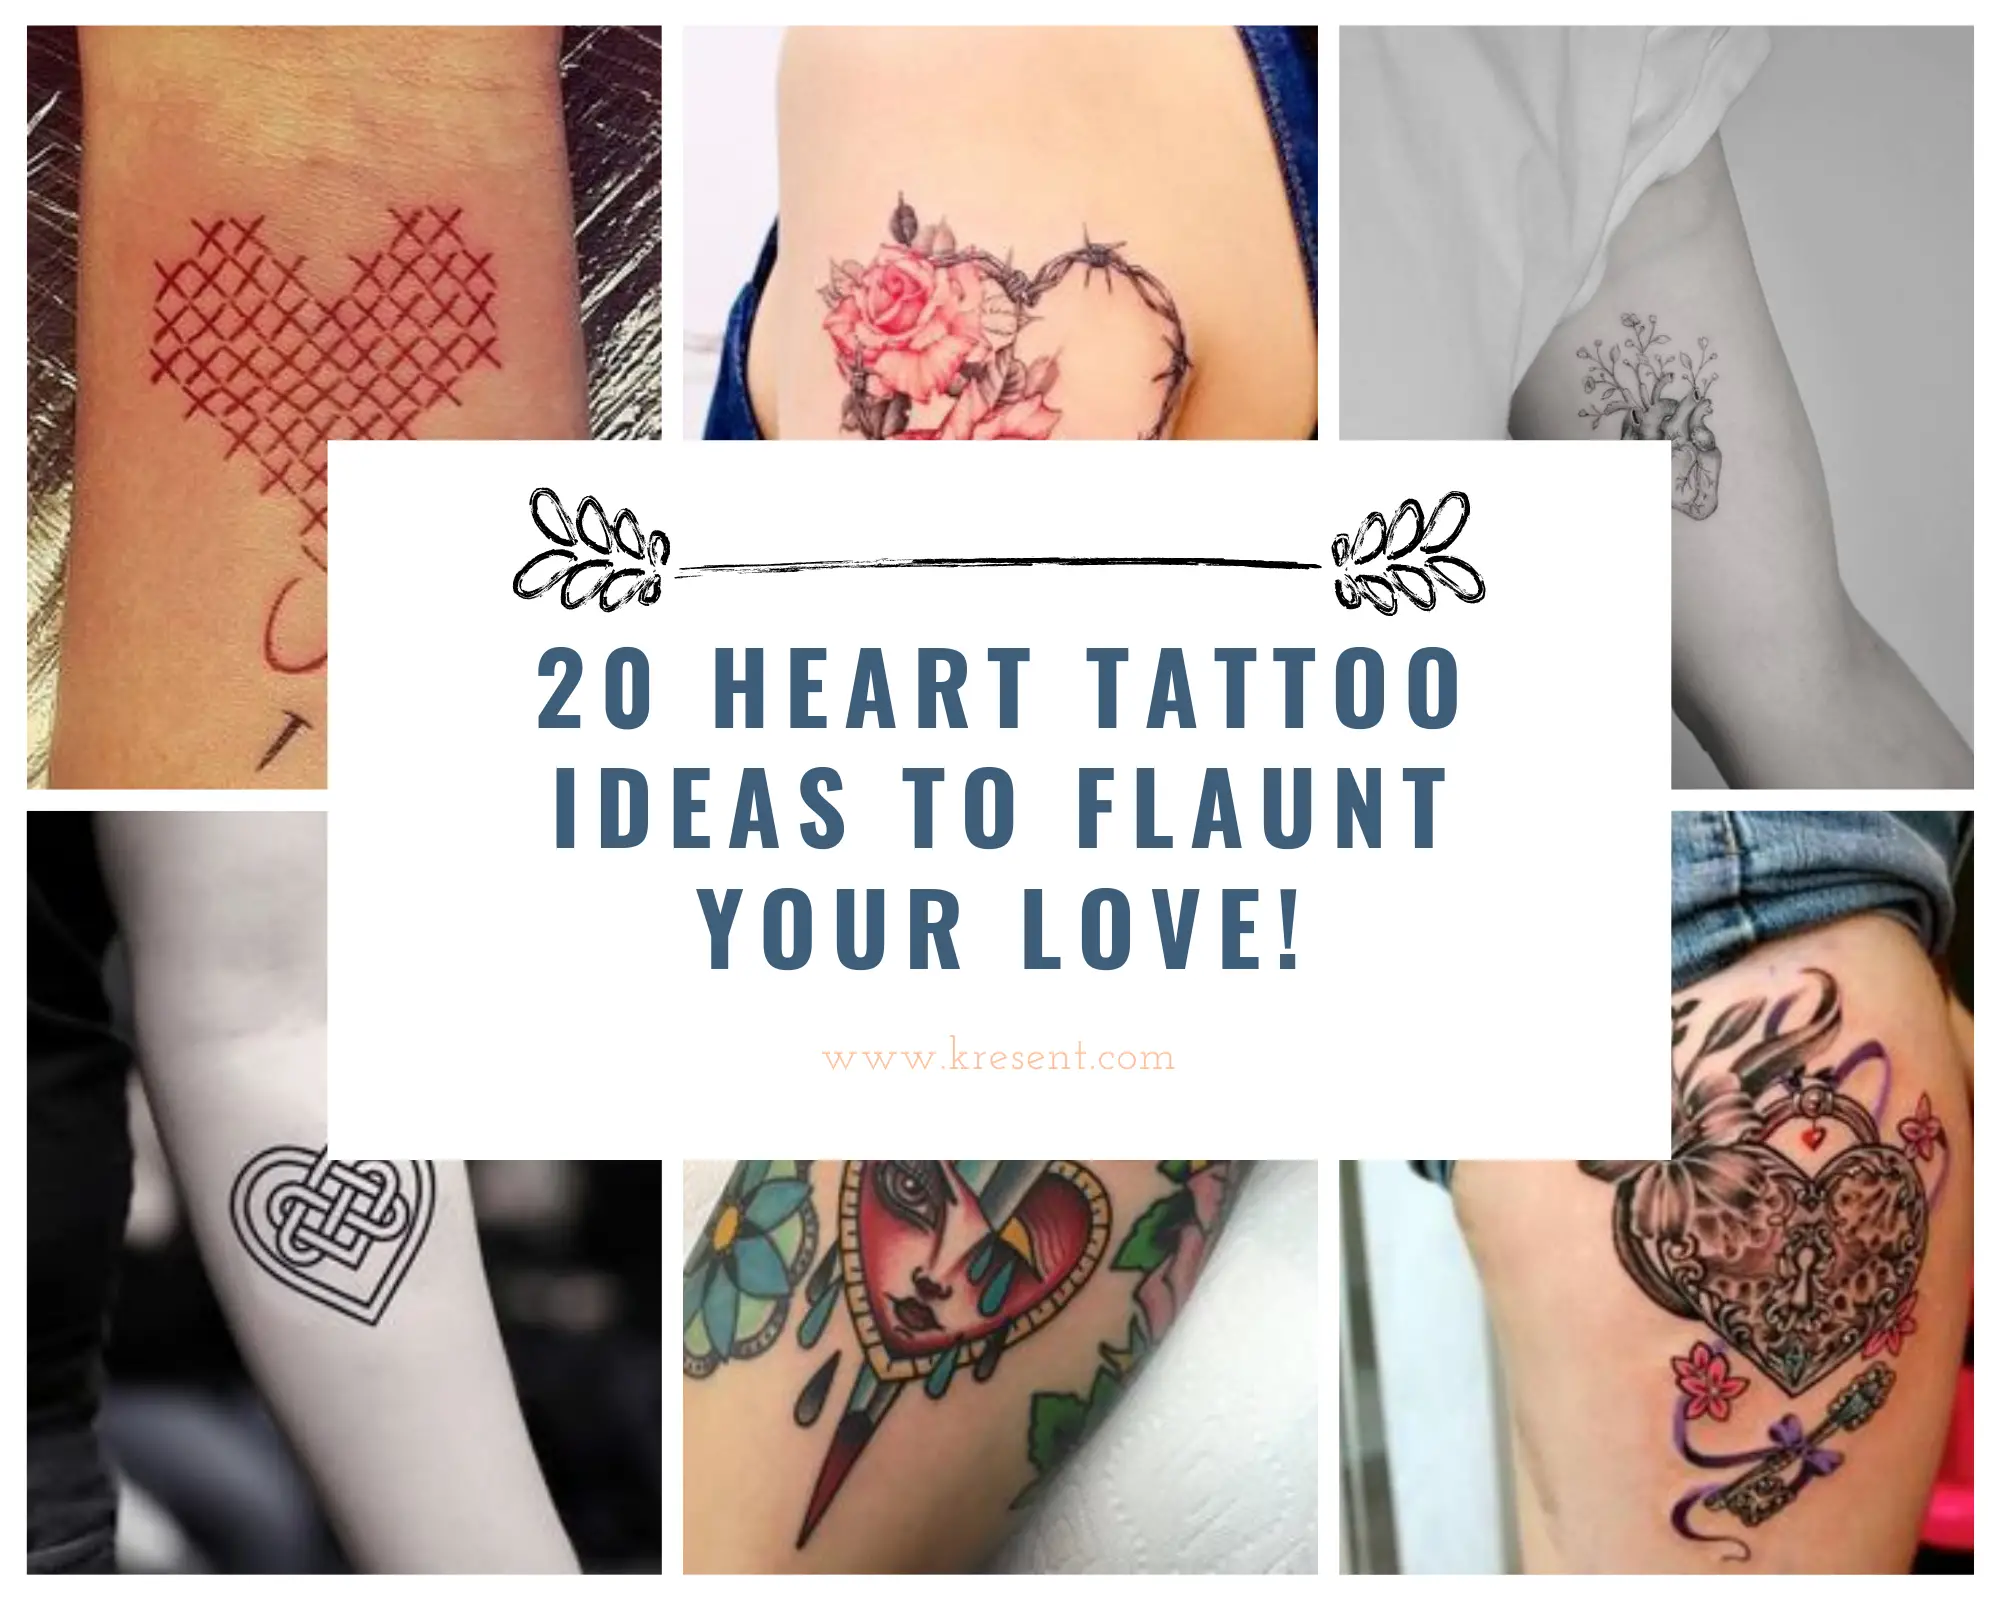 20 Heart Tattoo Ideas To Flaunt Your Love! Rose, Three Hearts Tattoo & More  – Lifestyle